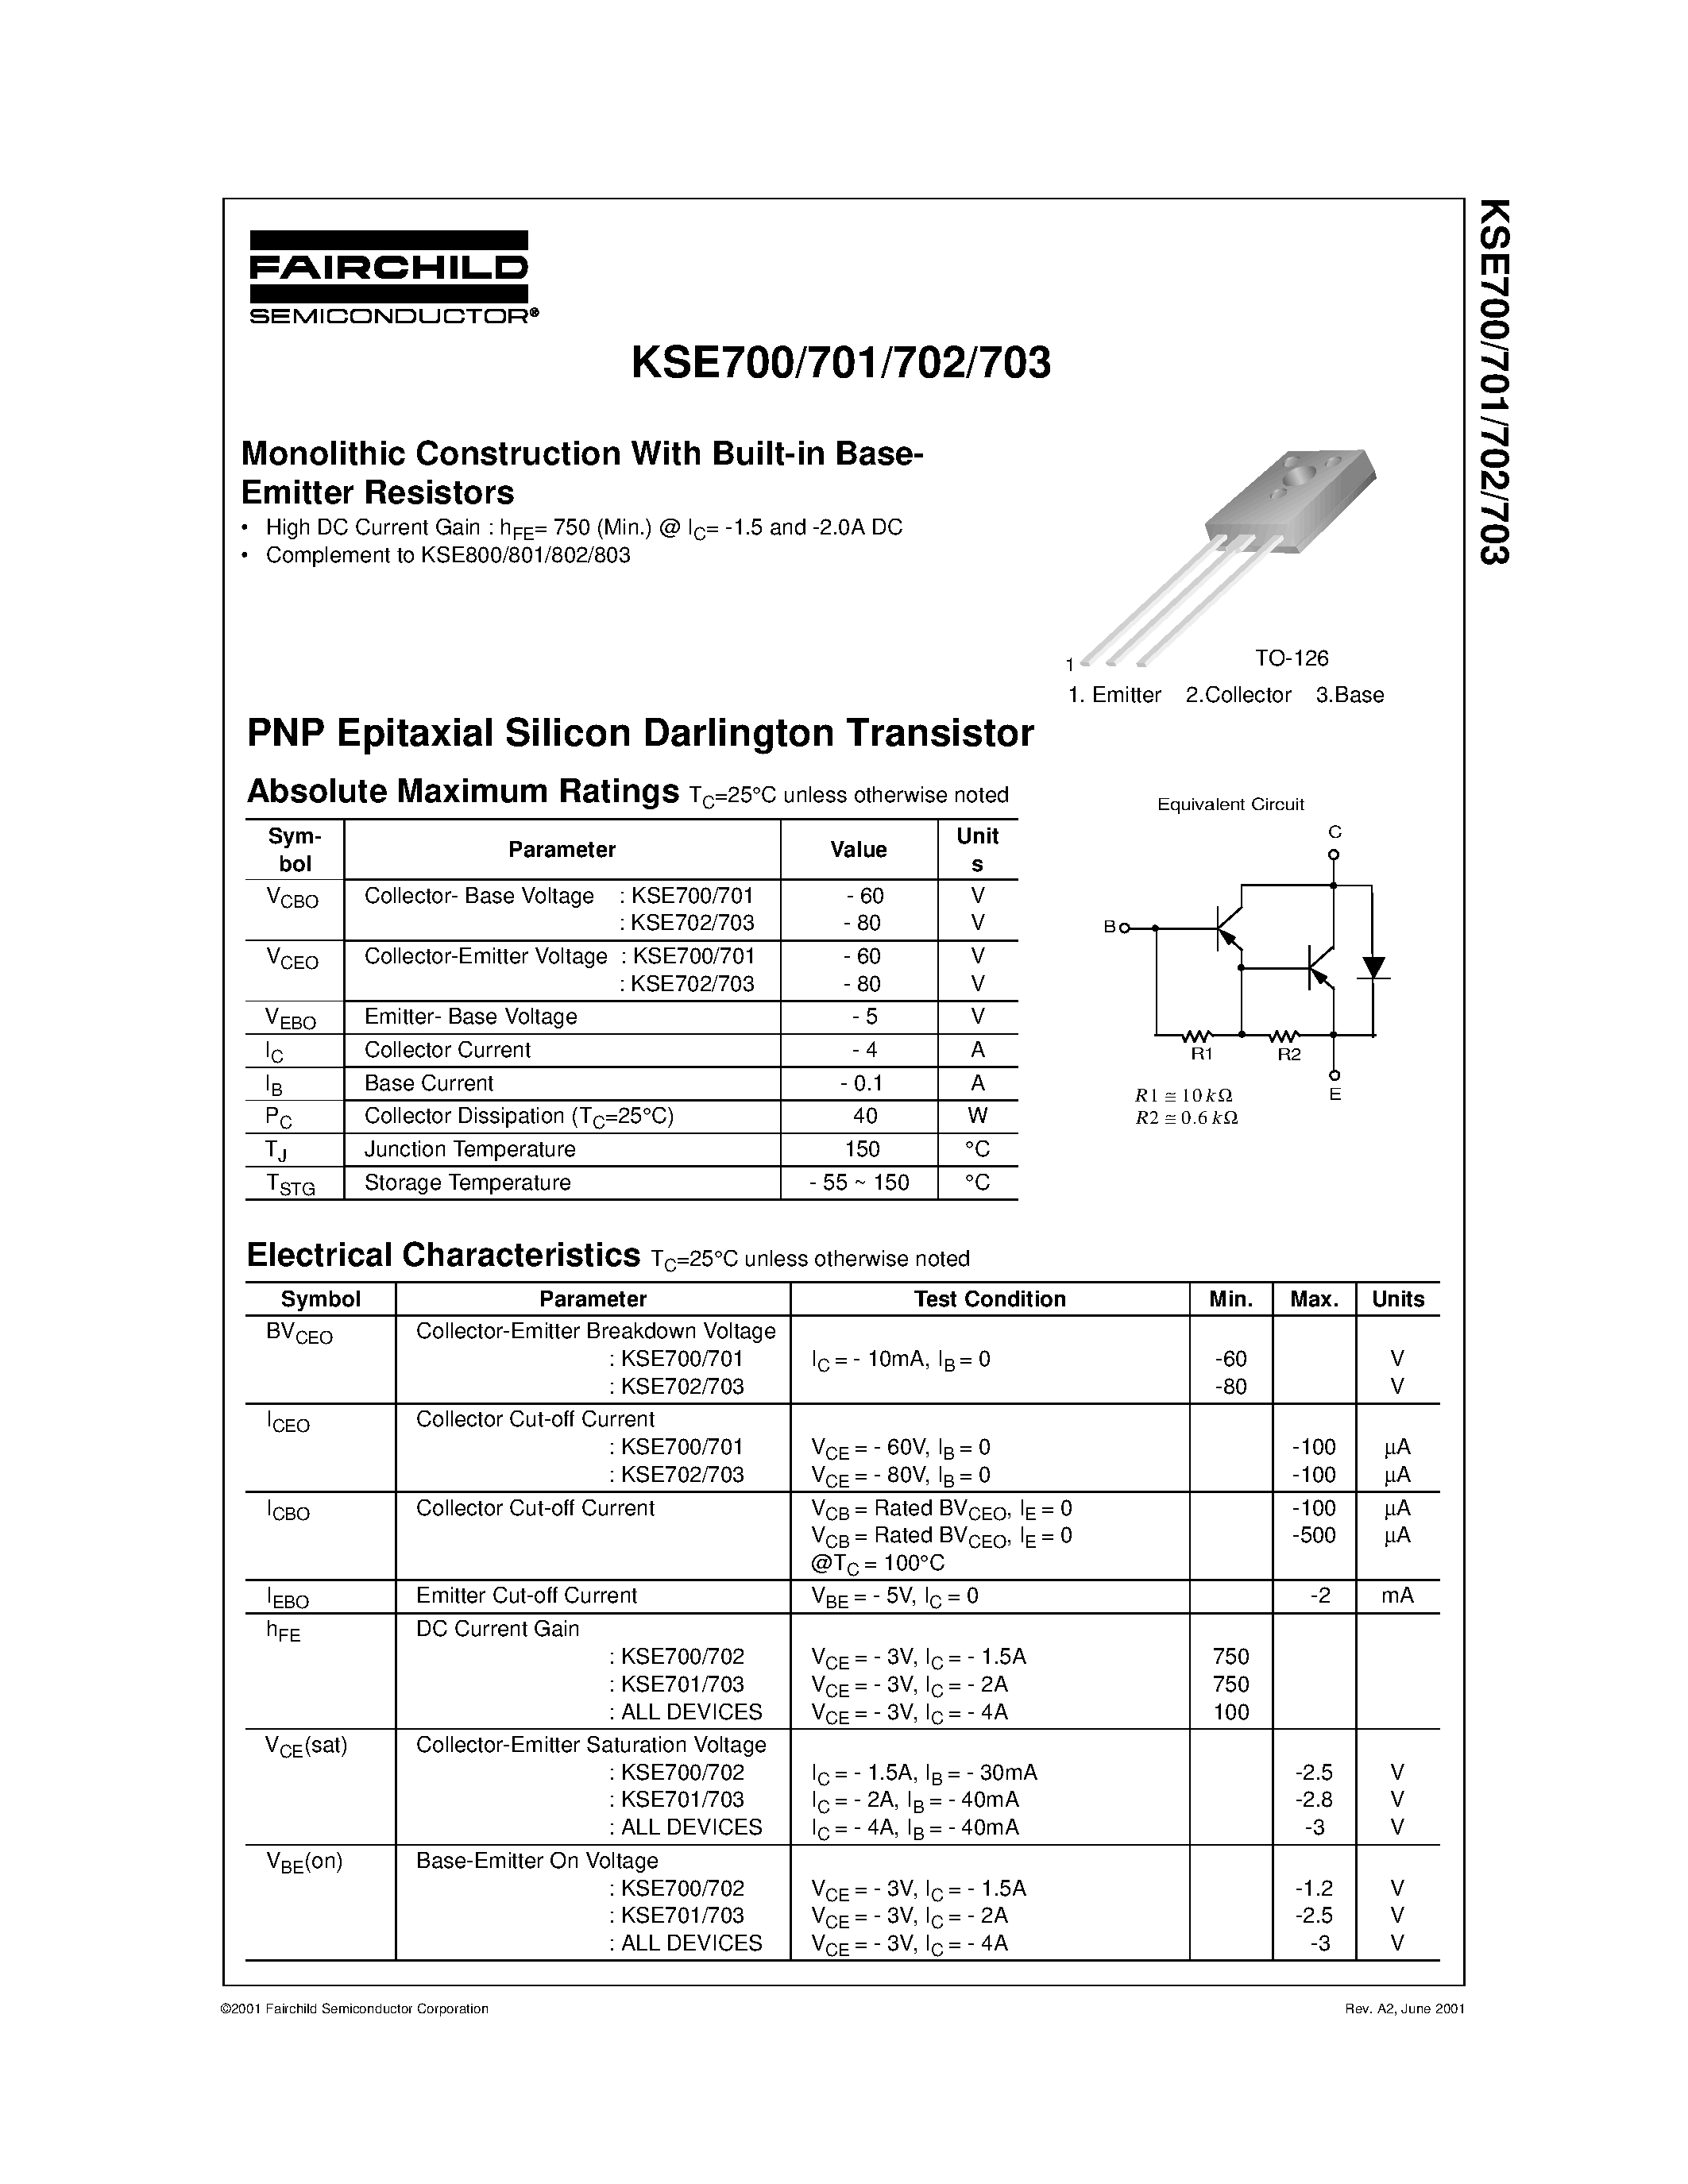 Даташит KSE700 - Monolithic Construction With Built-in Base- Emitter Resistors страница 1